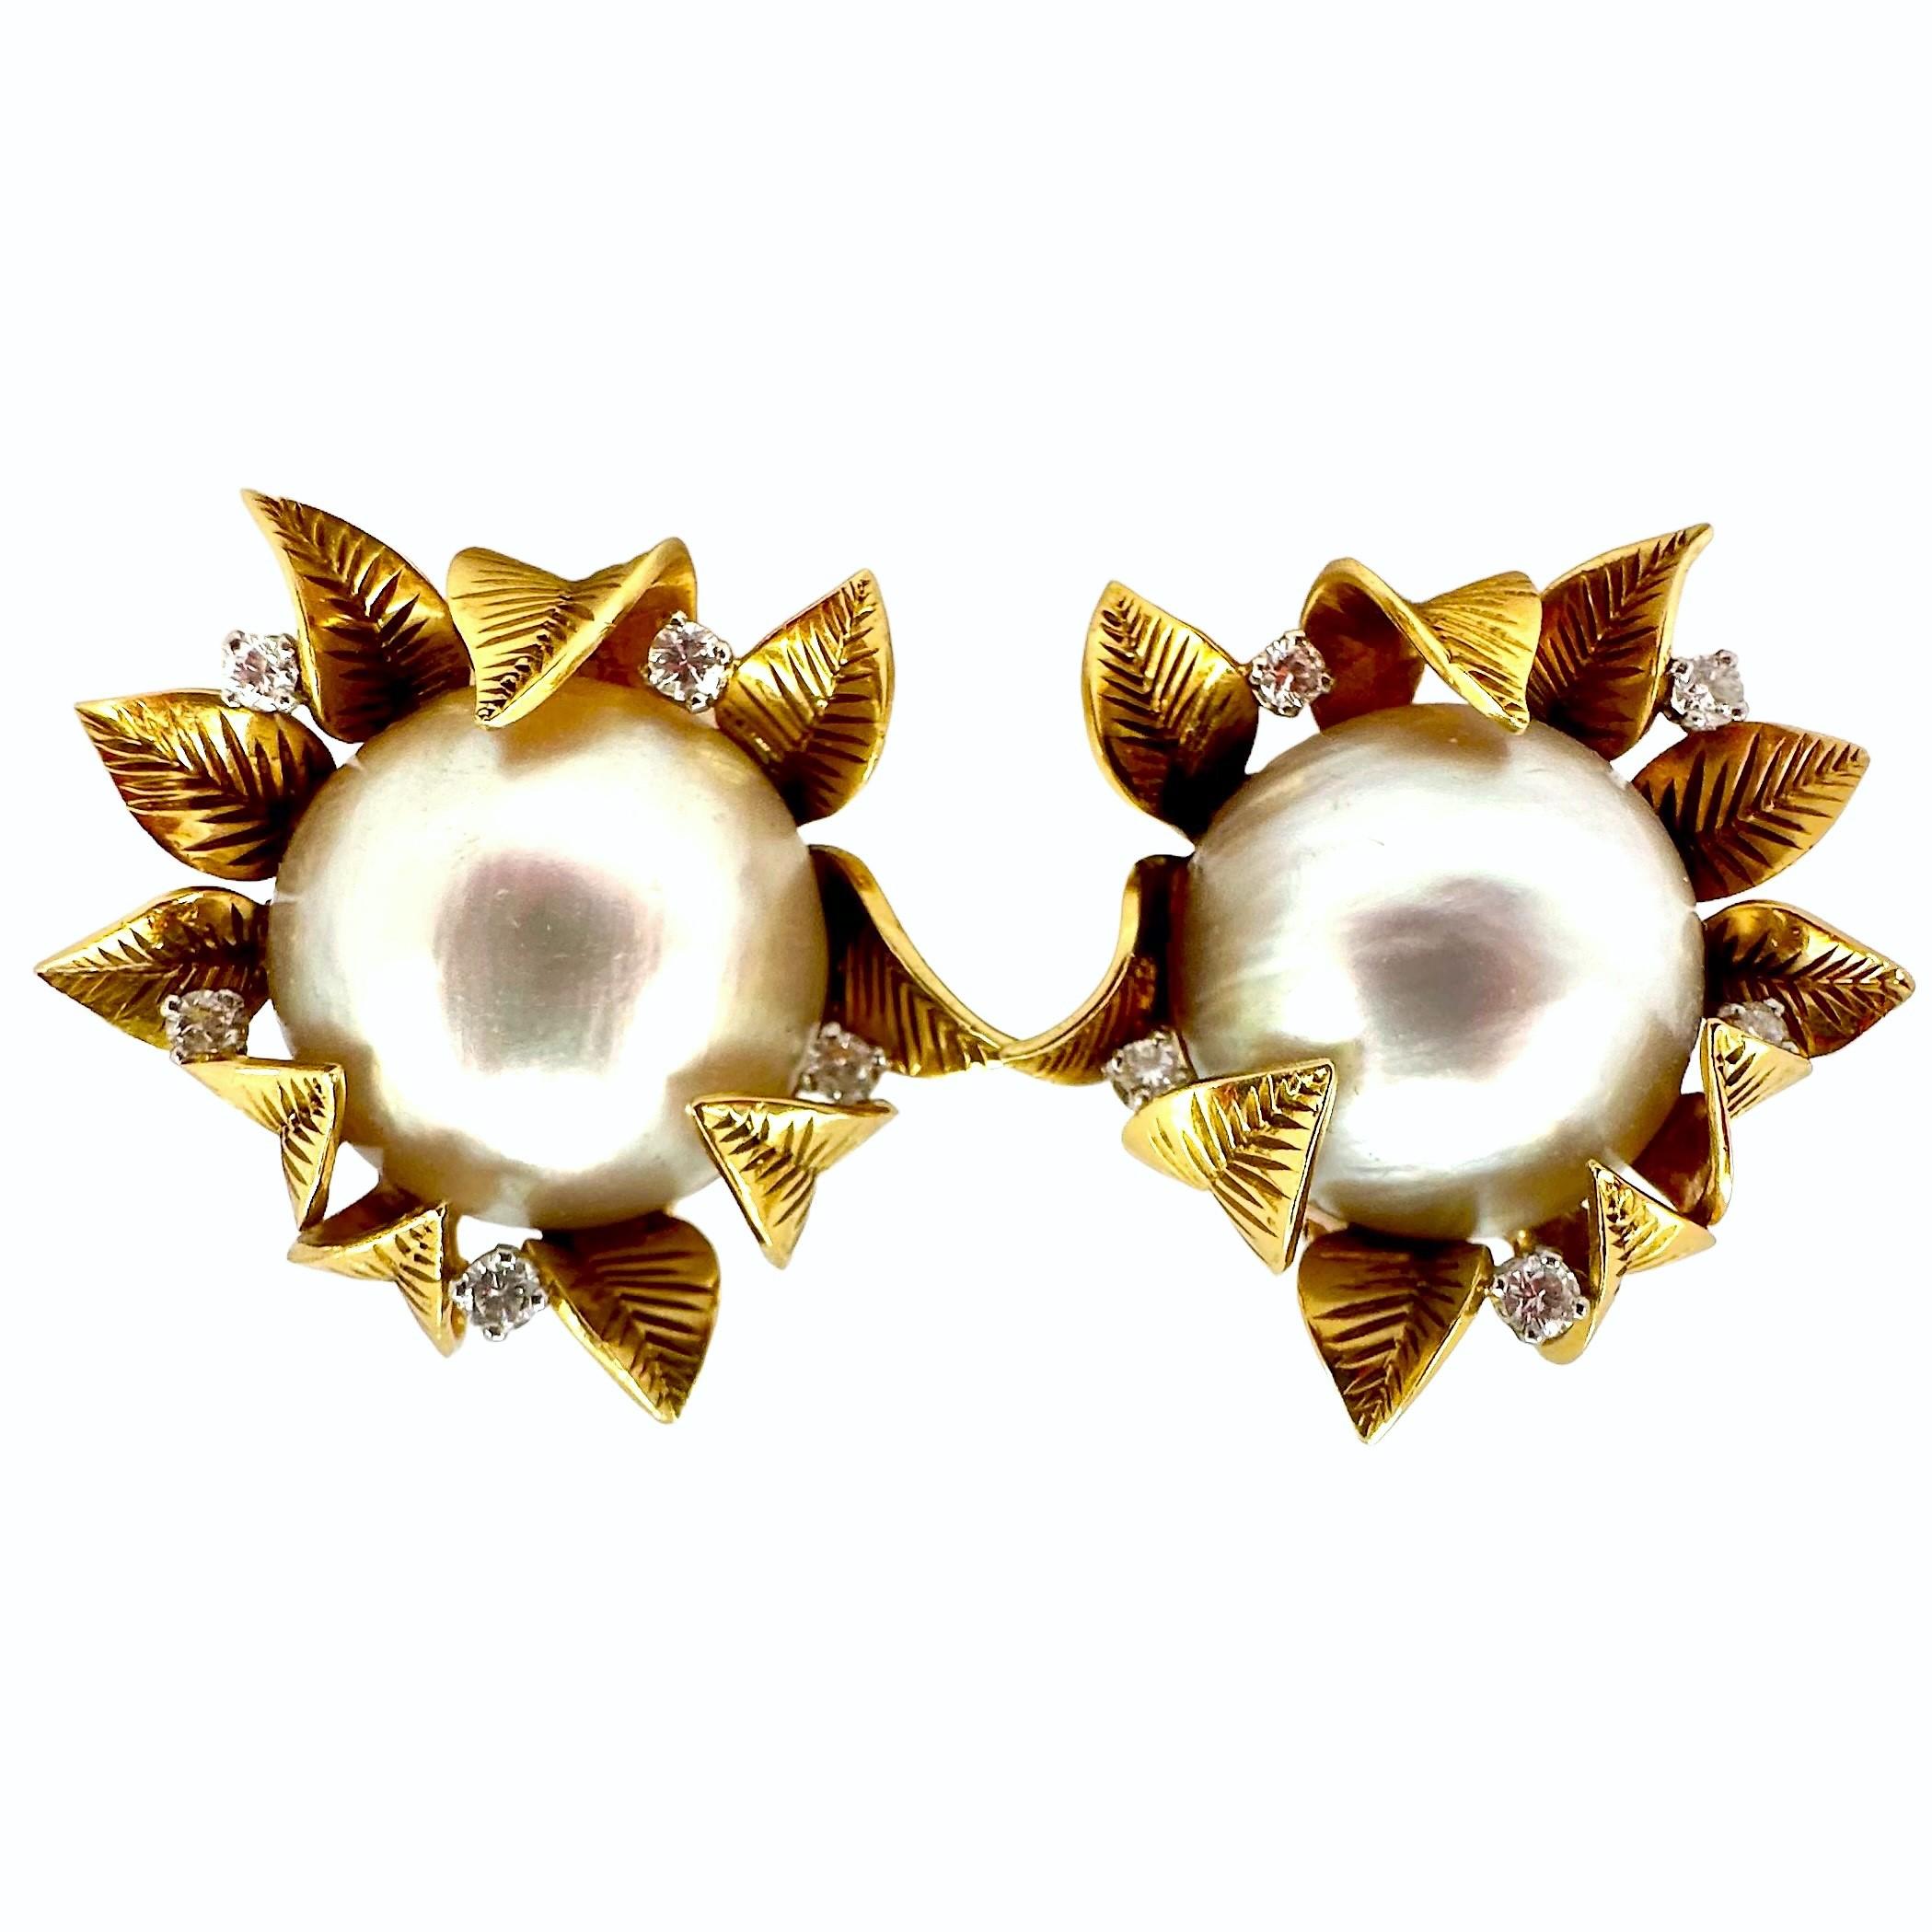 This striking vintage pair of 18k yellow gold, diamond and mobe pearl clip on earrings were artfully crafted in France during the middle of the last century. They are big, bold and absolutely beautiful. The pair measure 1  1 /8 inches in length and